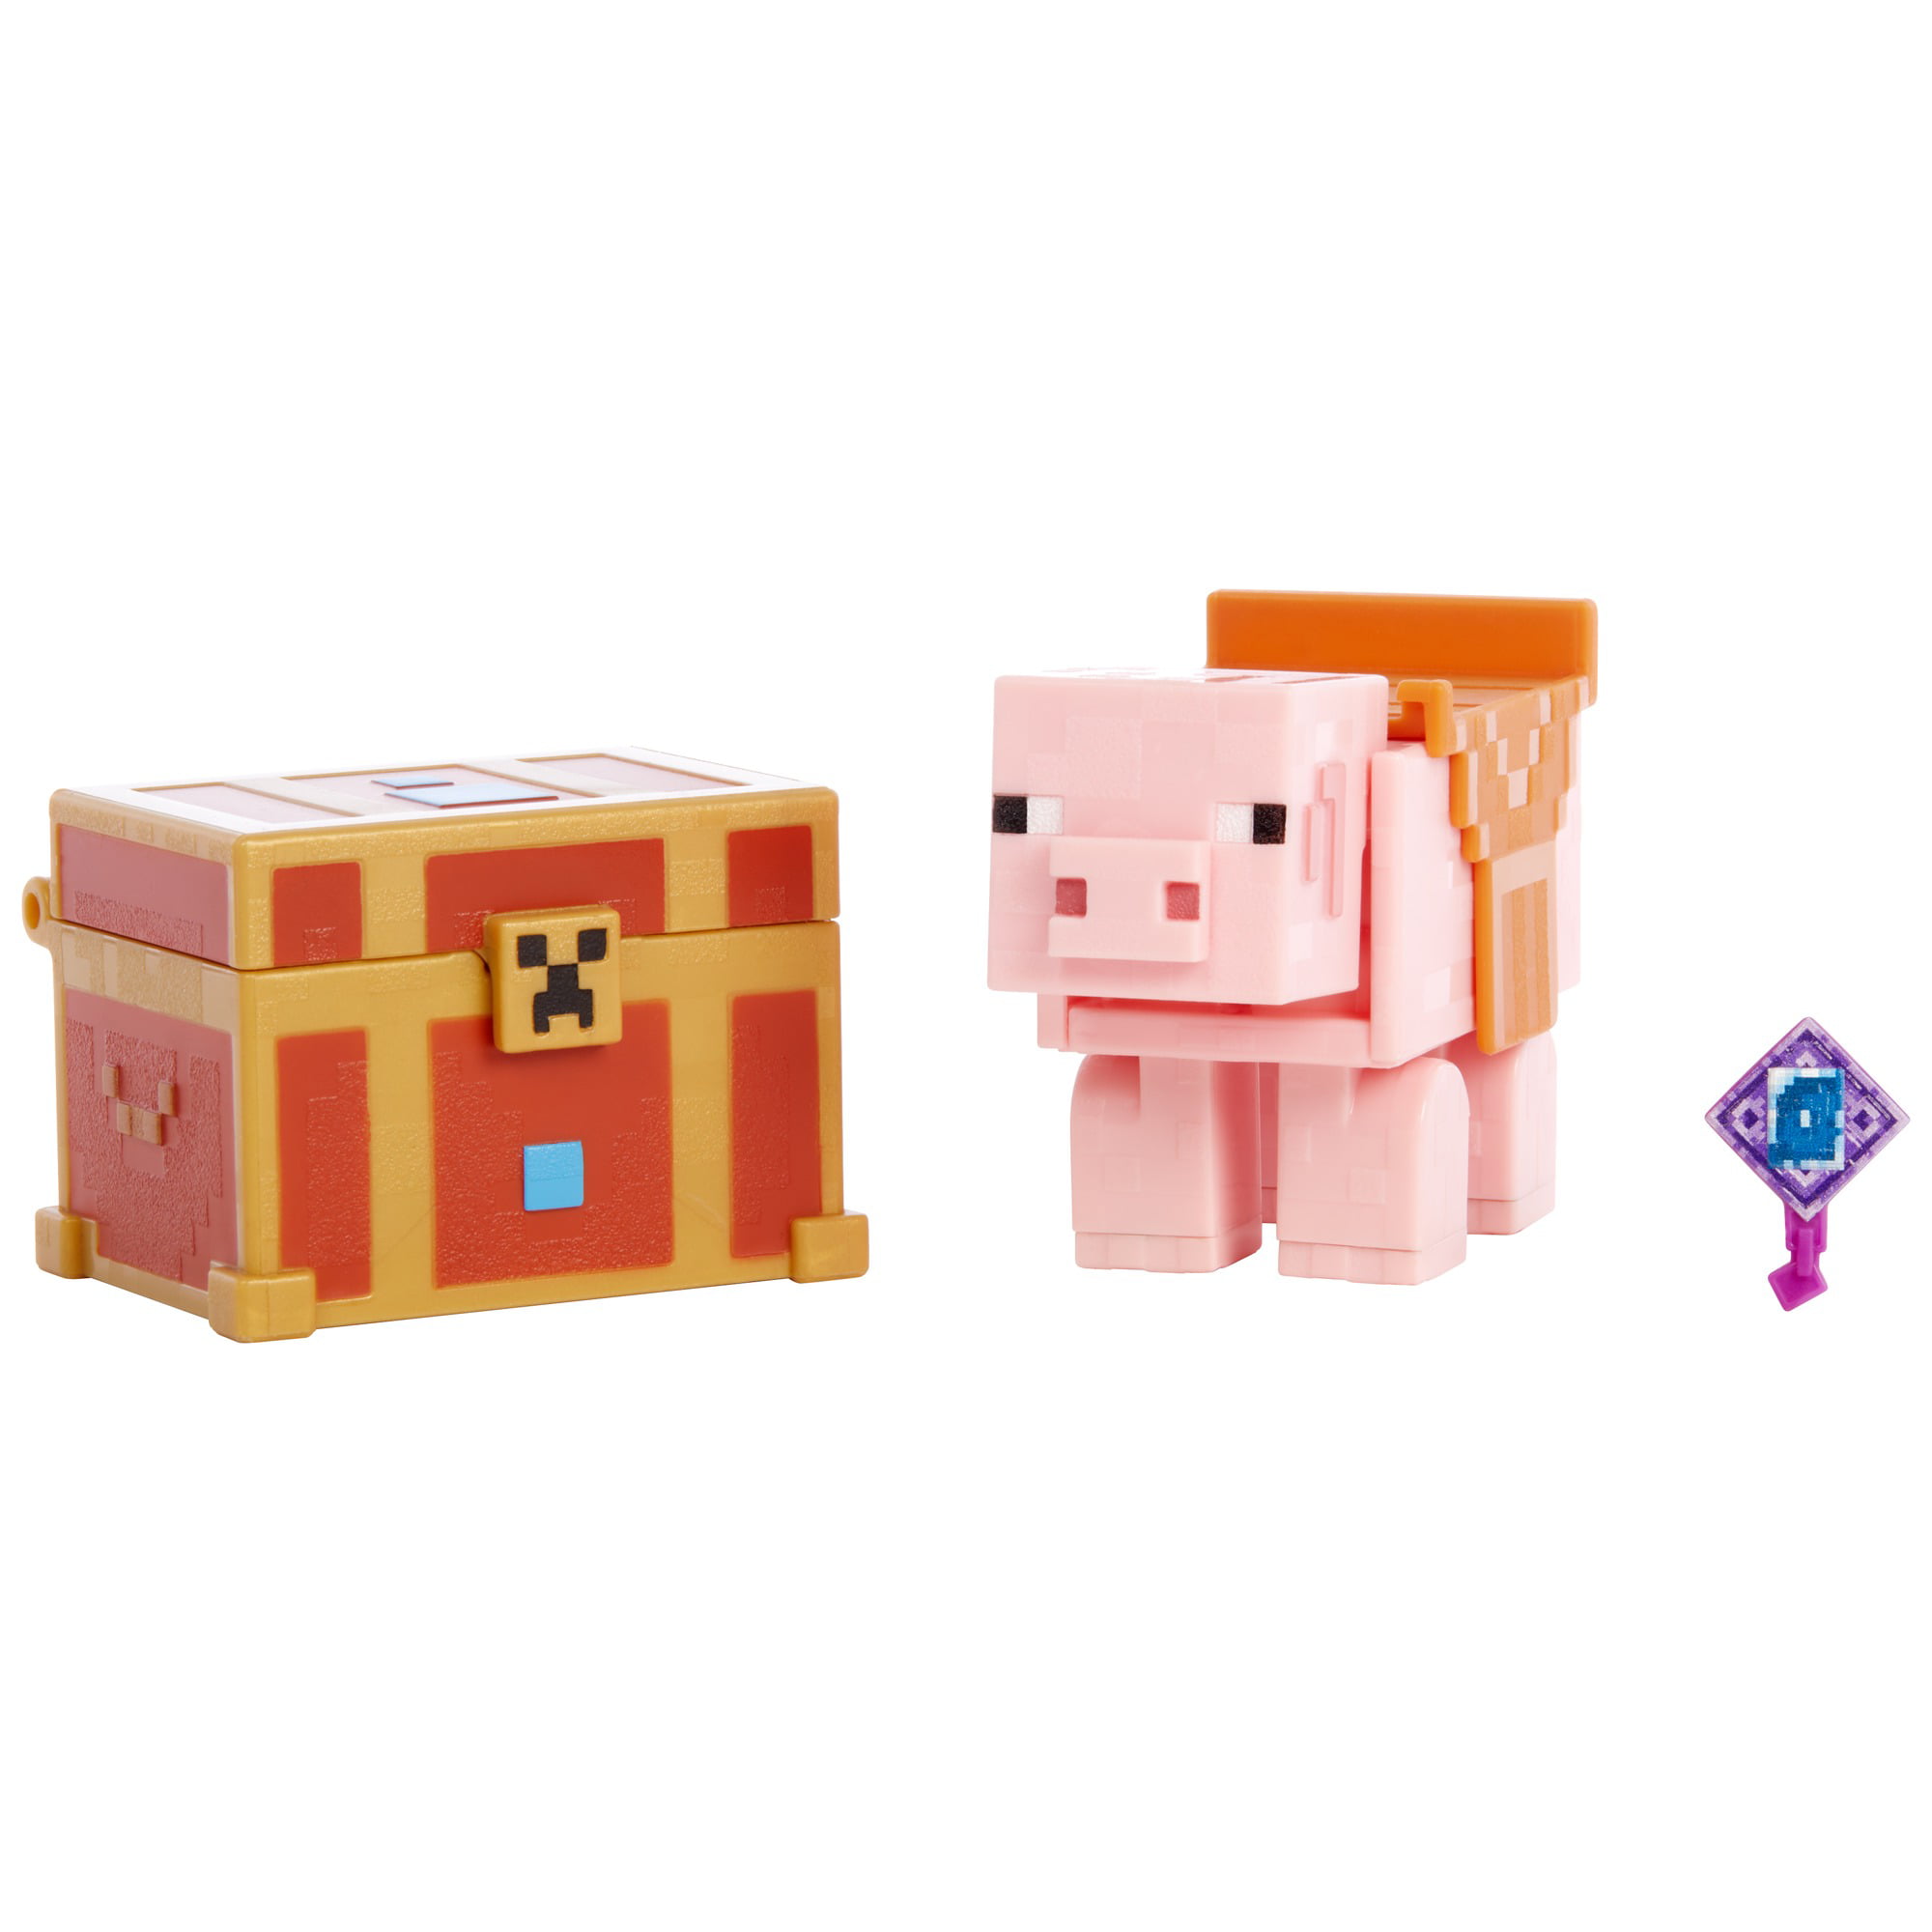 Minecraft Dungeons 3.25-In Collectible Battle Figure and Accessories